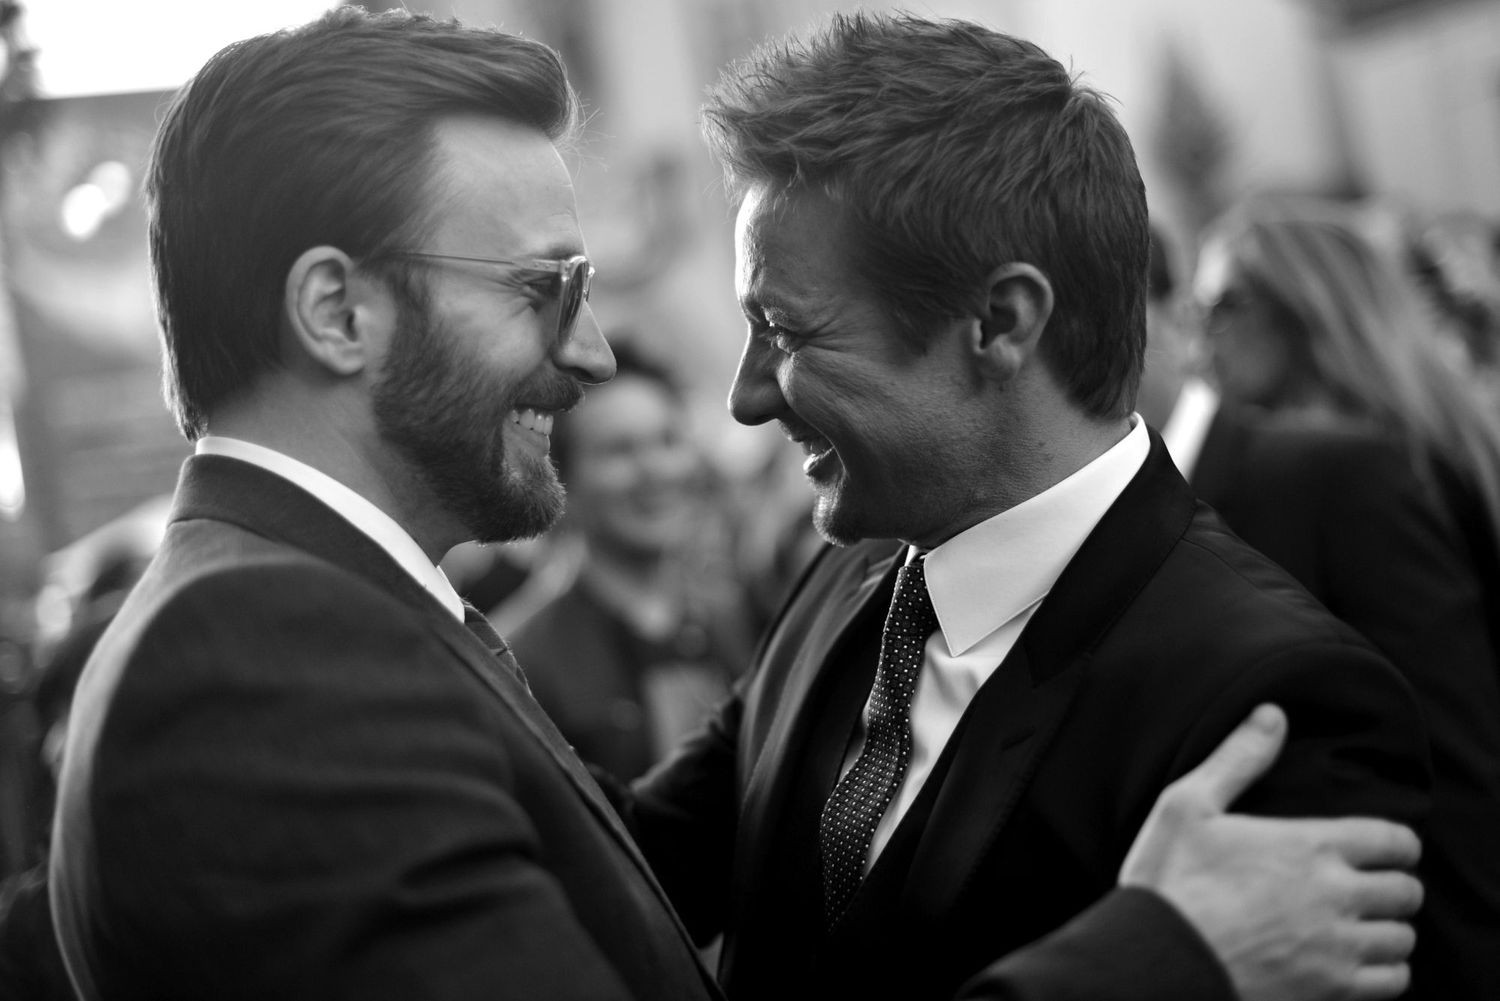 Jeremy Renner photographed with Chris Evans.